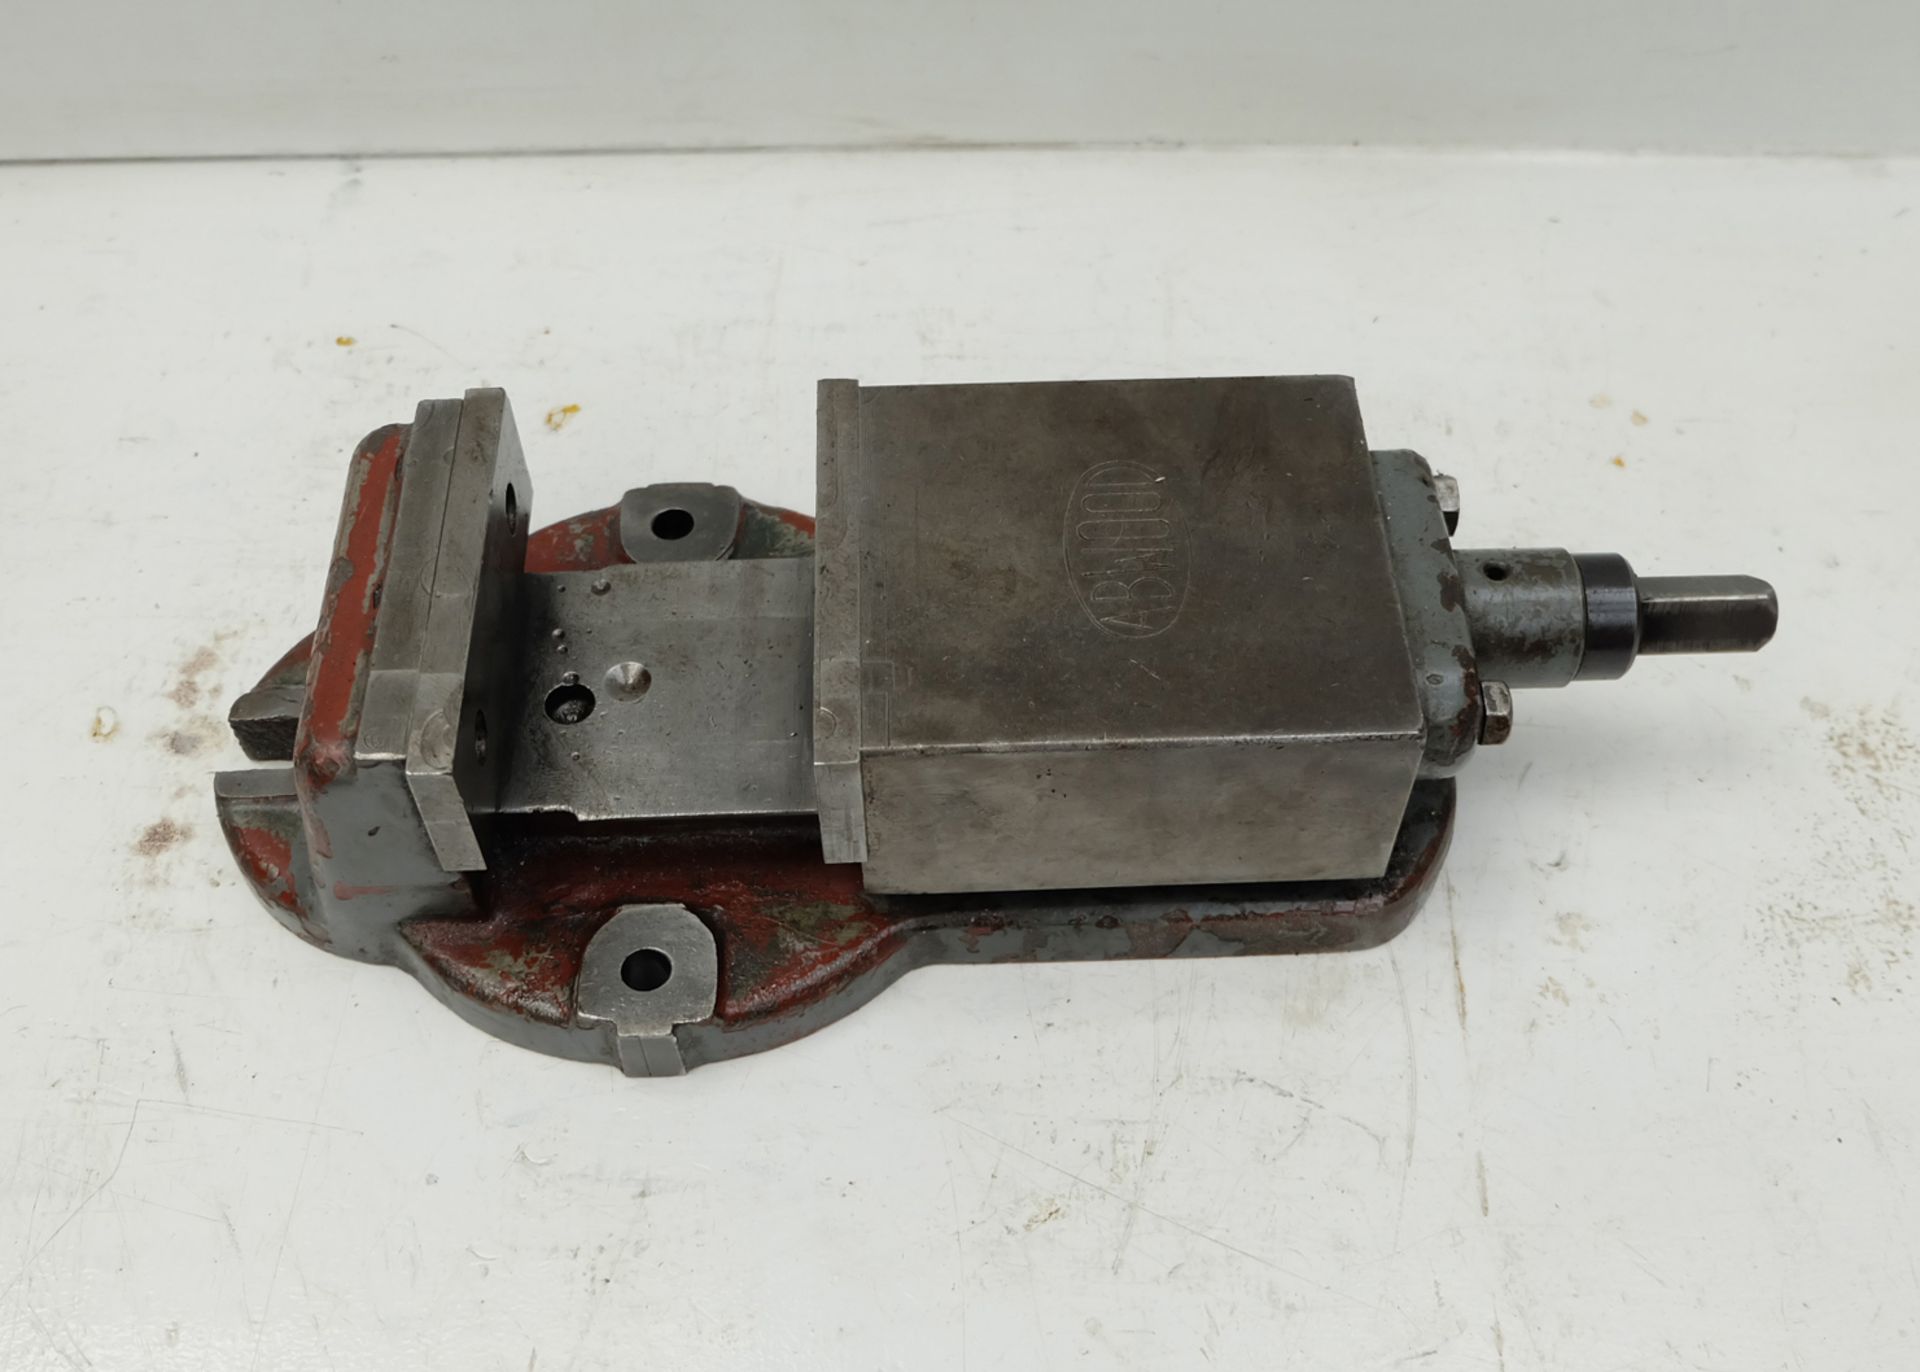 Abwood Machine Vice Jaw Width 4 1/4". Max Opening 2 3/4" Approx.